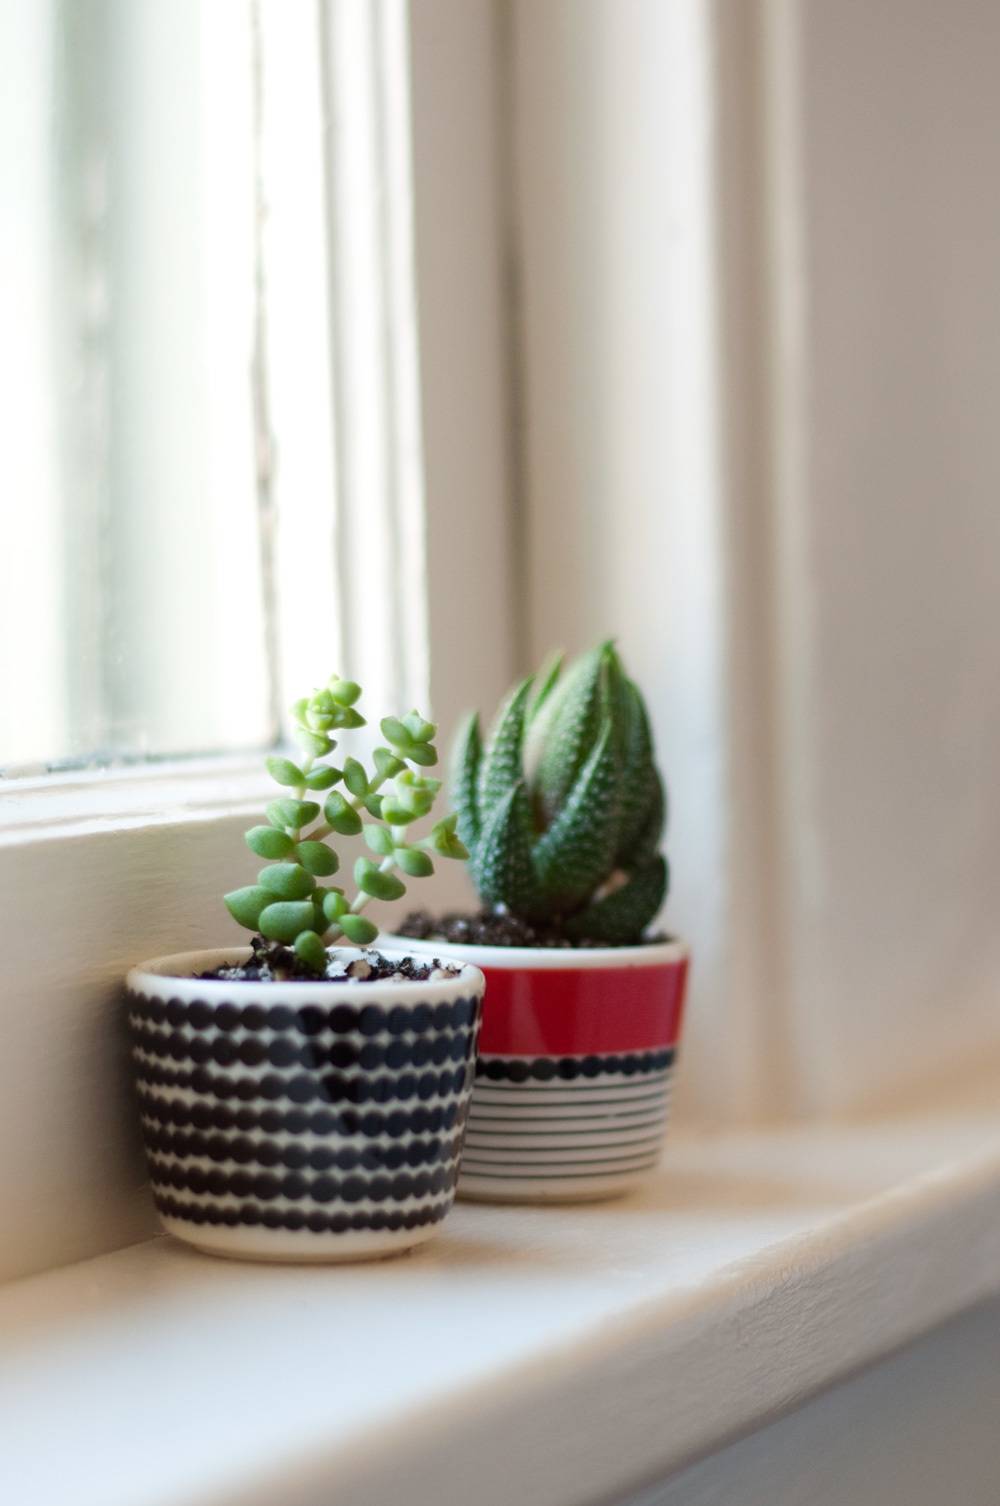 Two small potted plants sitting next to one another on a white windowsill in a sunny room.